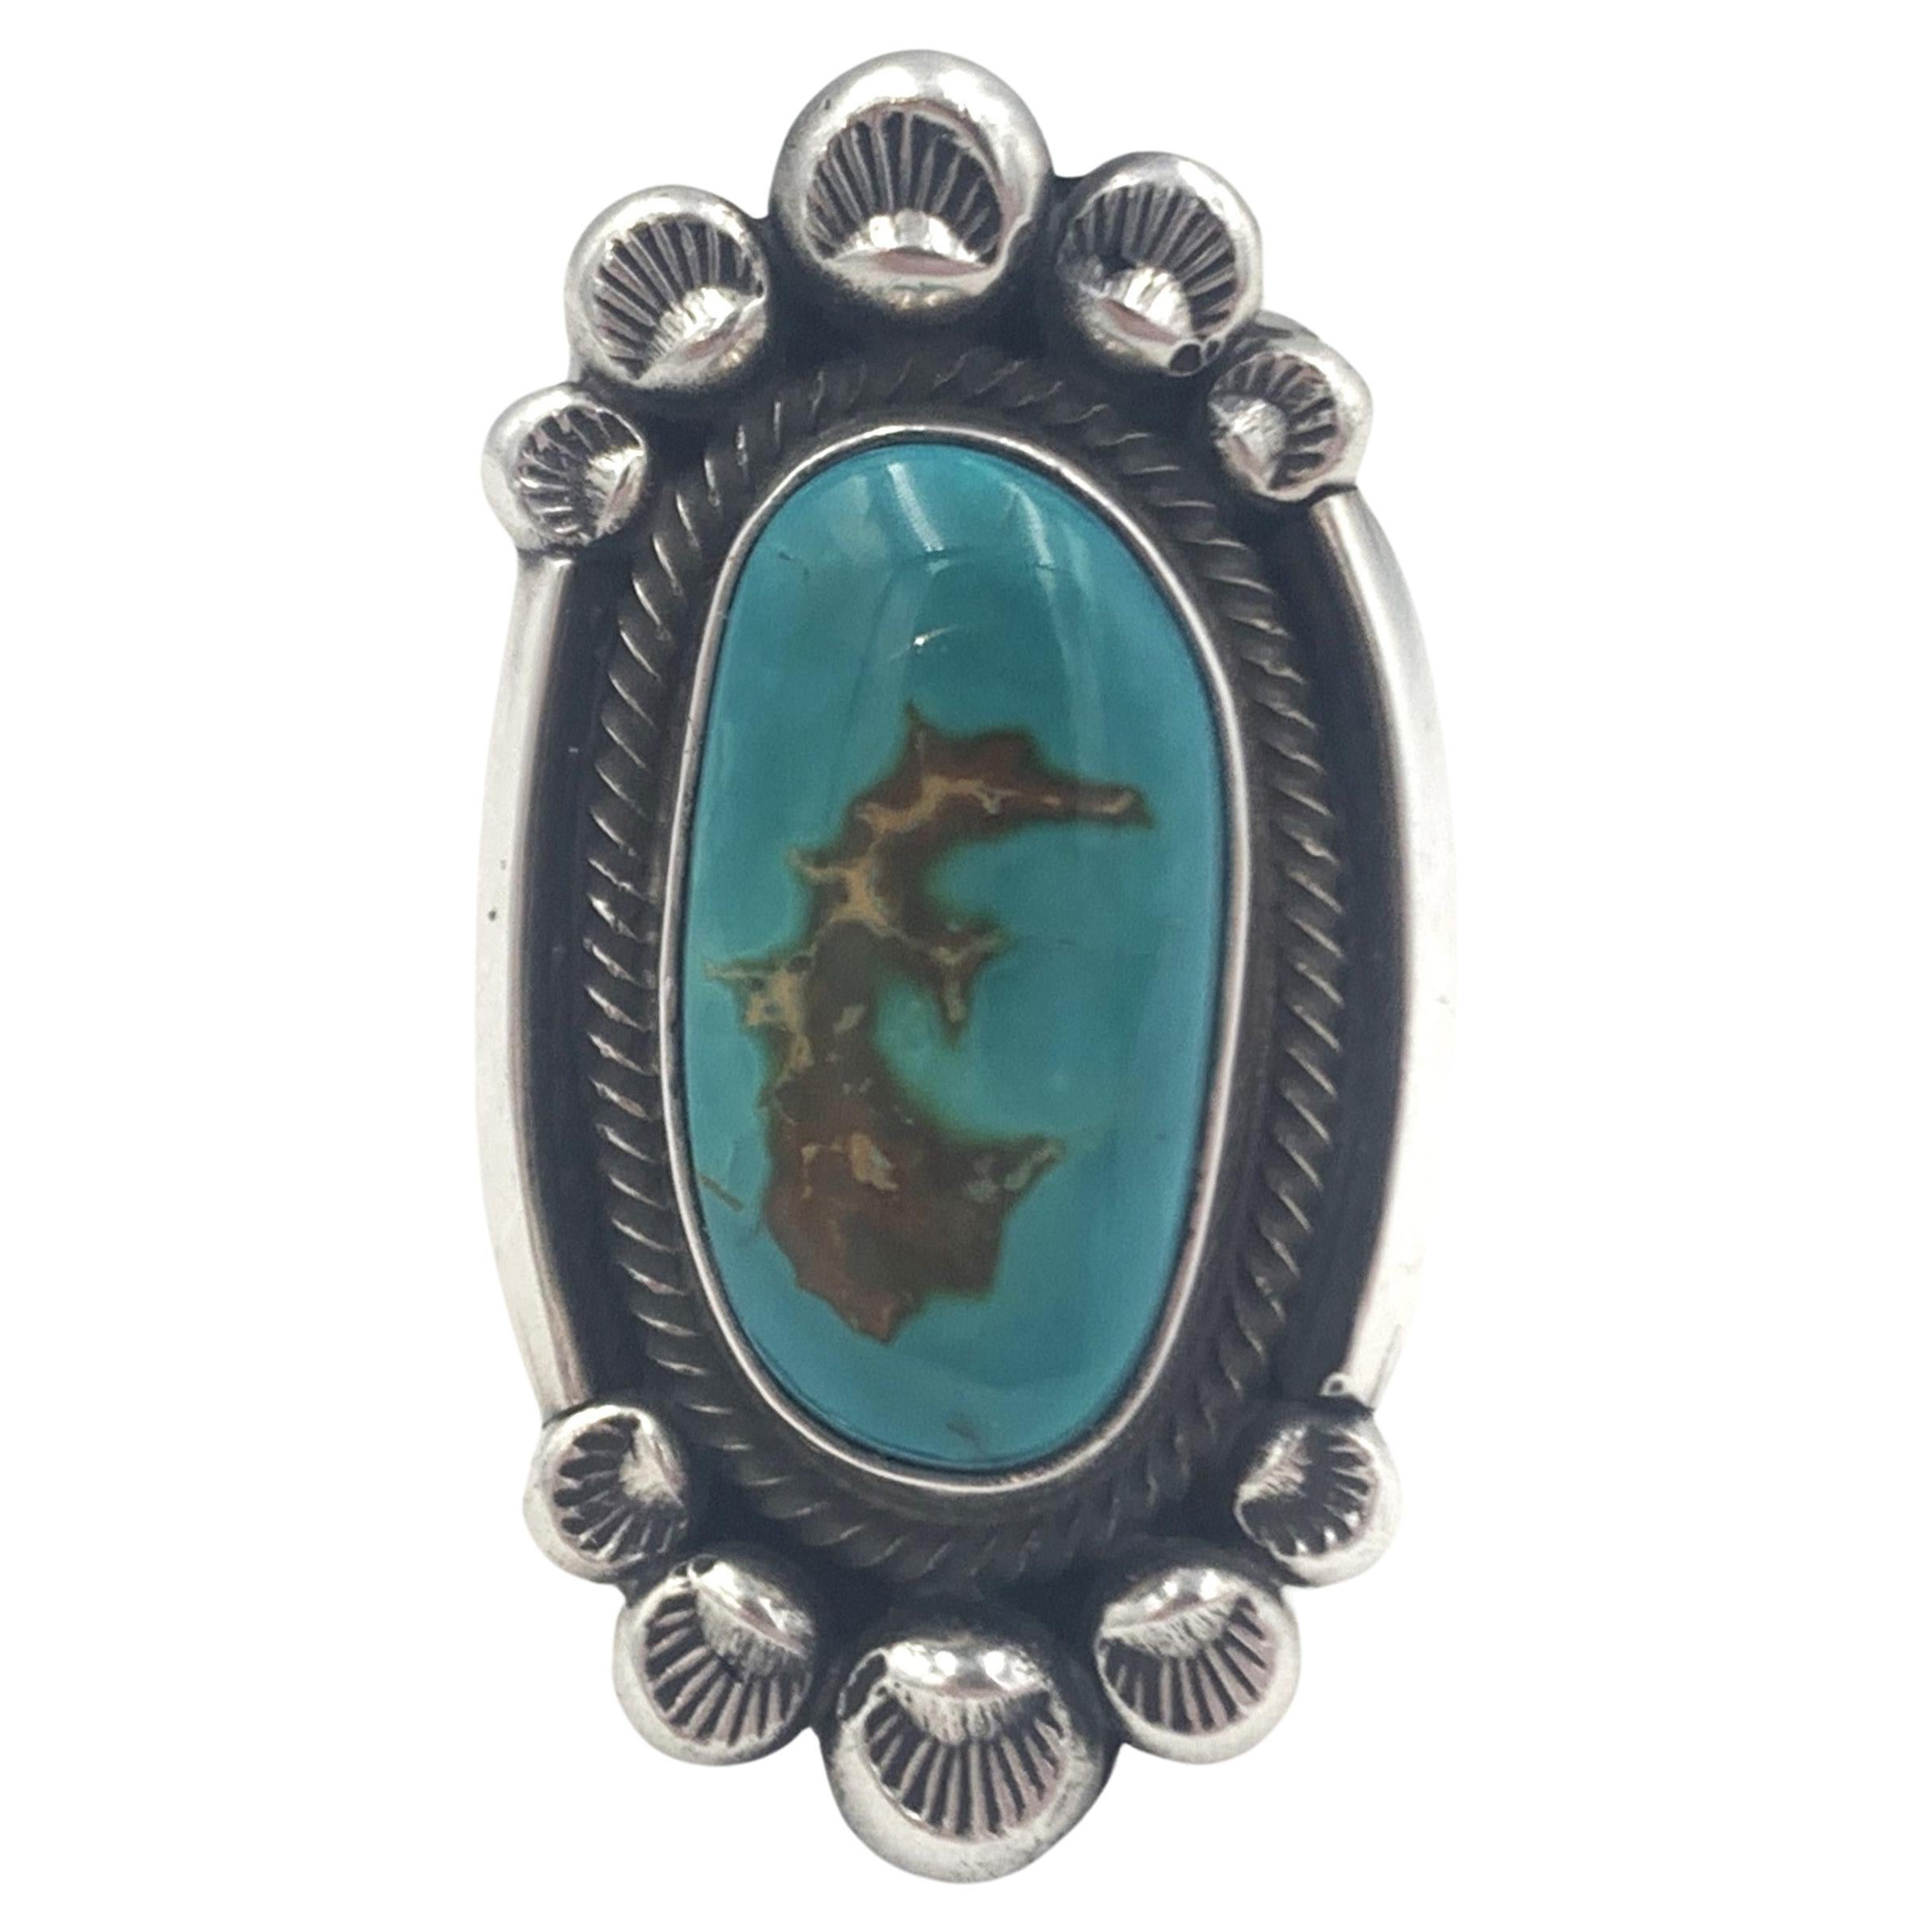 Fox turquoise sterling silver ring by Navajo silversmith Leon Martinez.  The 3/8” x 3/4” Fox turquoise cabochon is in a beautiful hand stamped setting; the band is 3/8”.  

Size: Adjustable from 8.5 to 13.5

The Fox Turquoise mine, once called the